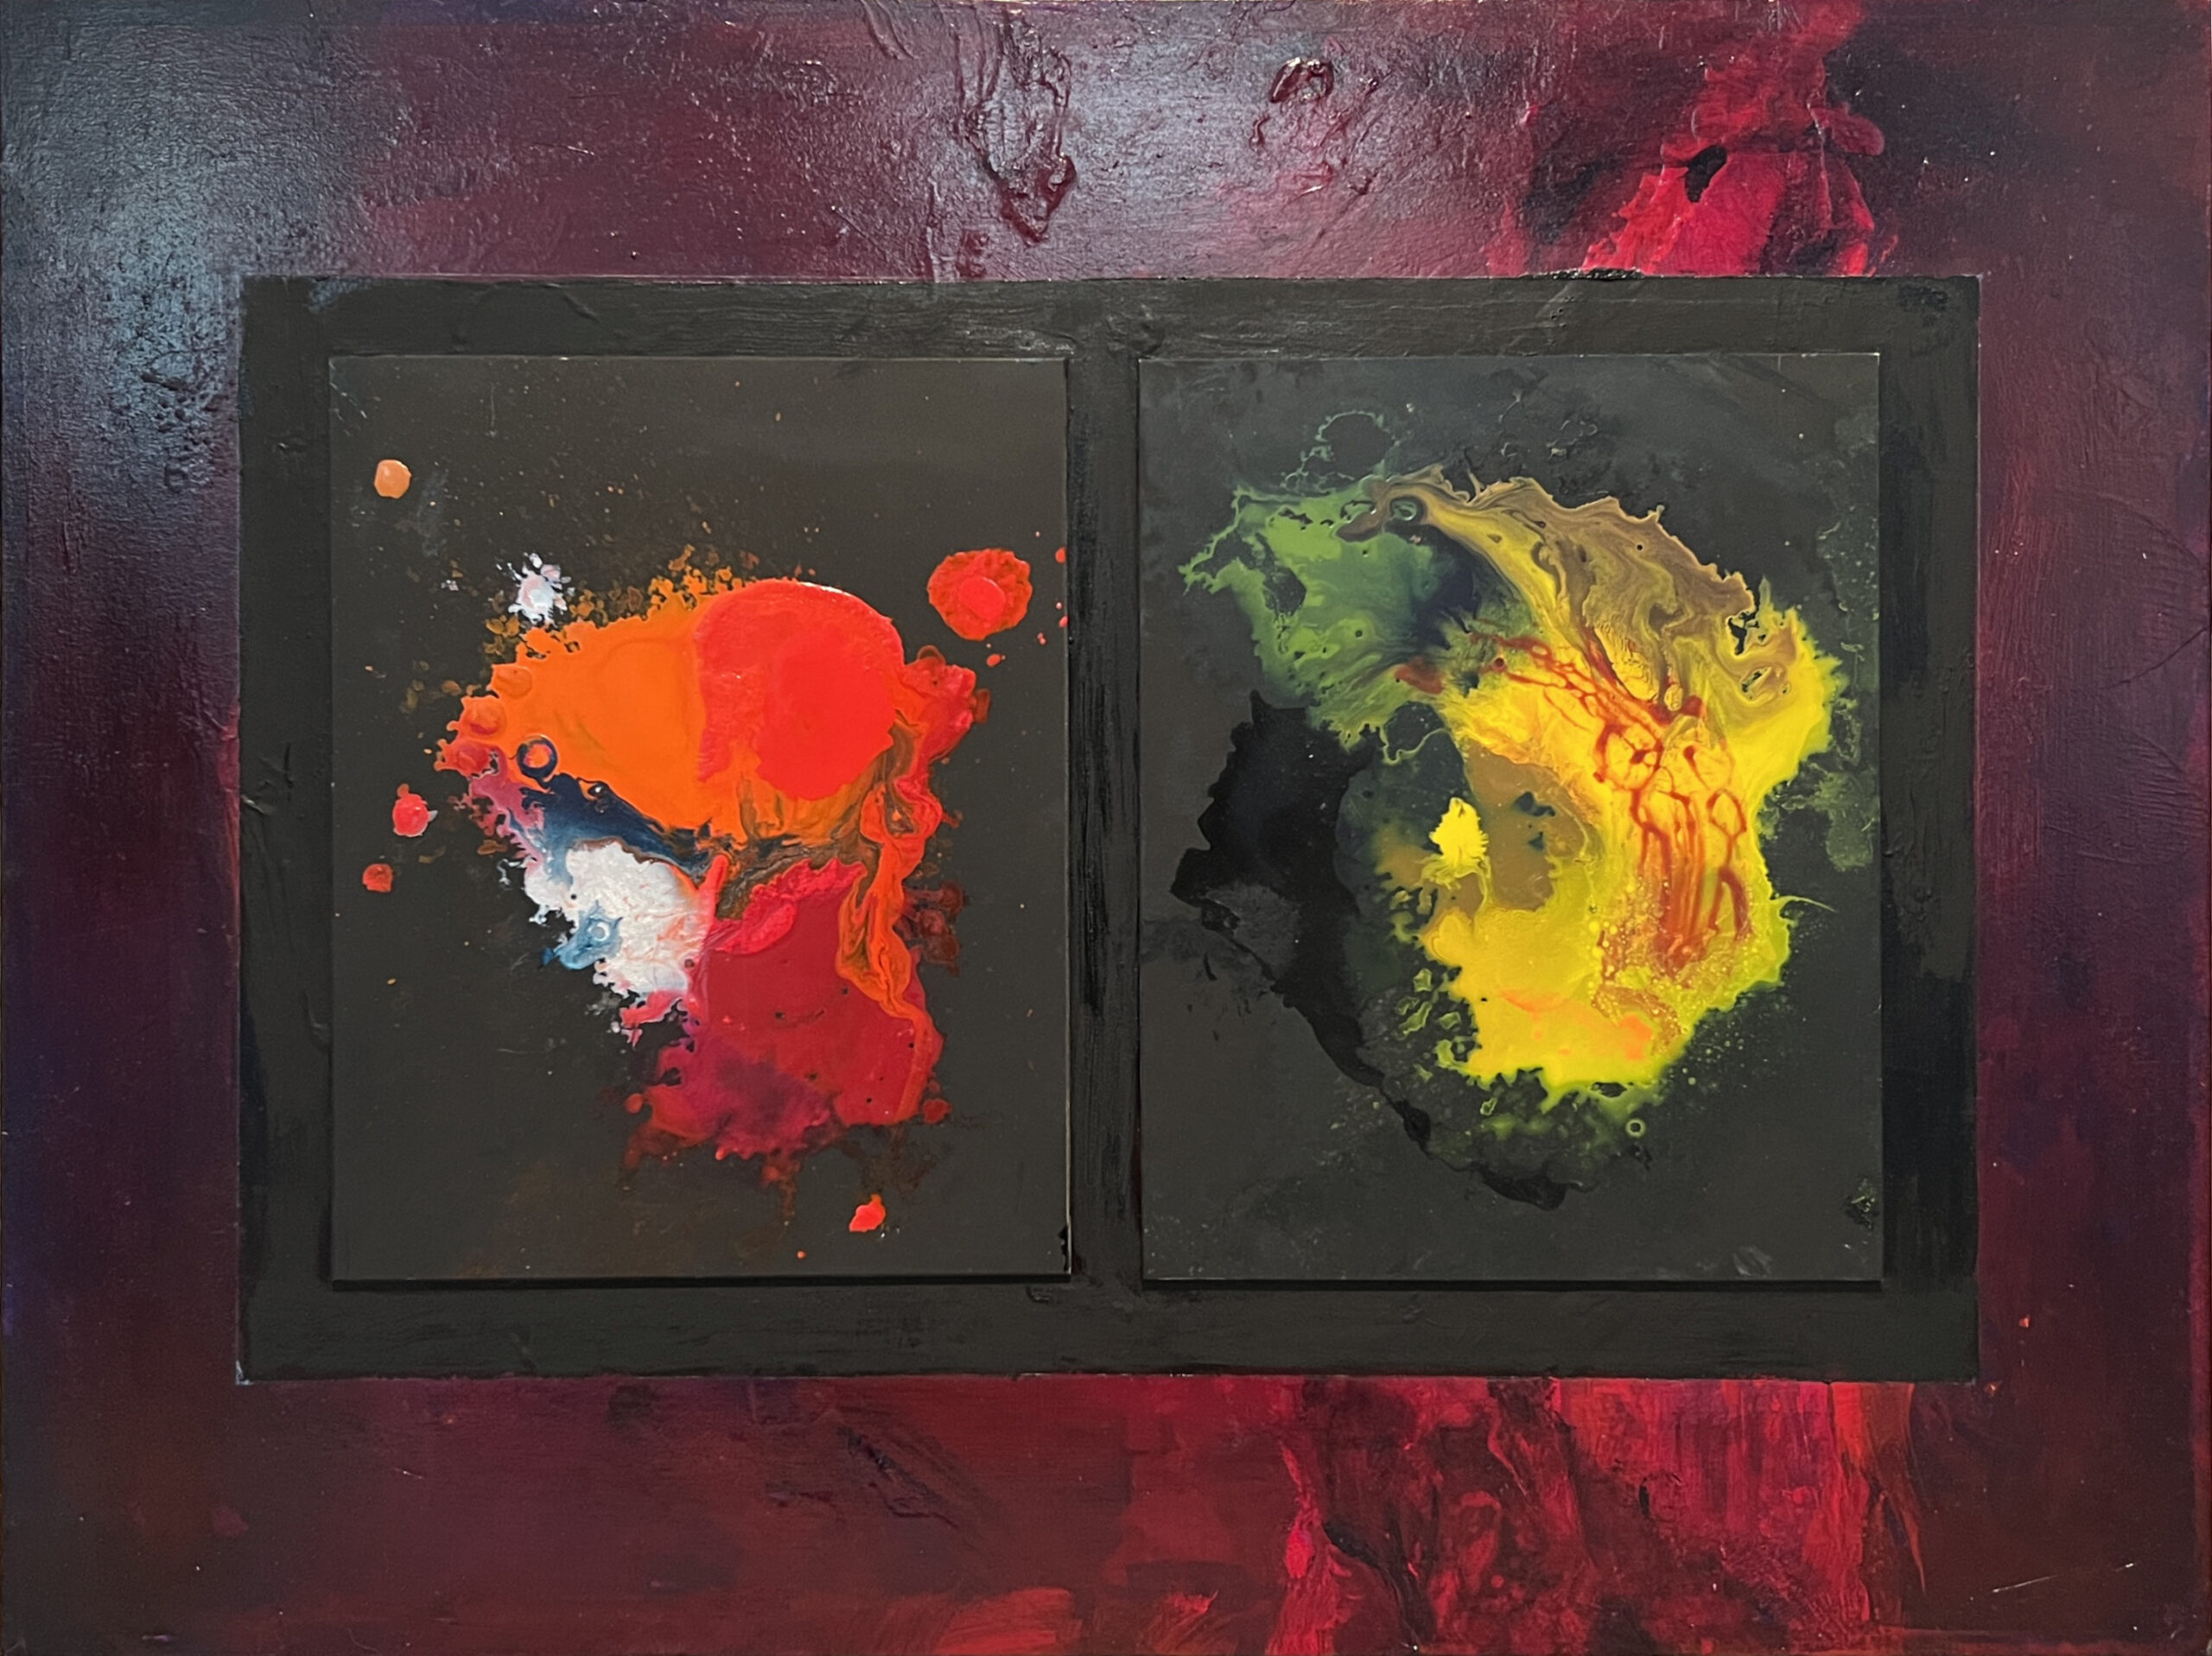 Michael Colpitts Abstract Paintings and Artwork, Mixed Media on Canvas Wall Art Abstract Simplistic, Mixed Media on Canvas, colorful abstract paintings, bold paintings, modern paintings on canvas, liquid acrylic painting, Medium Painting, medium abstract paintings for sale, dark abstract art